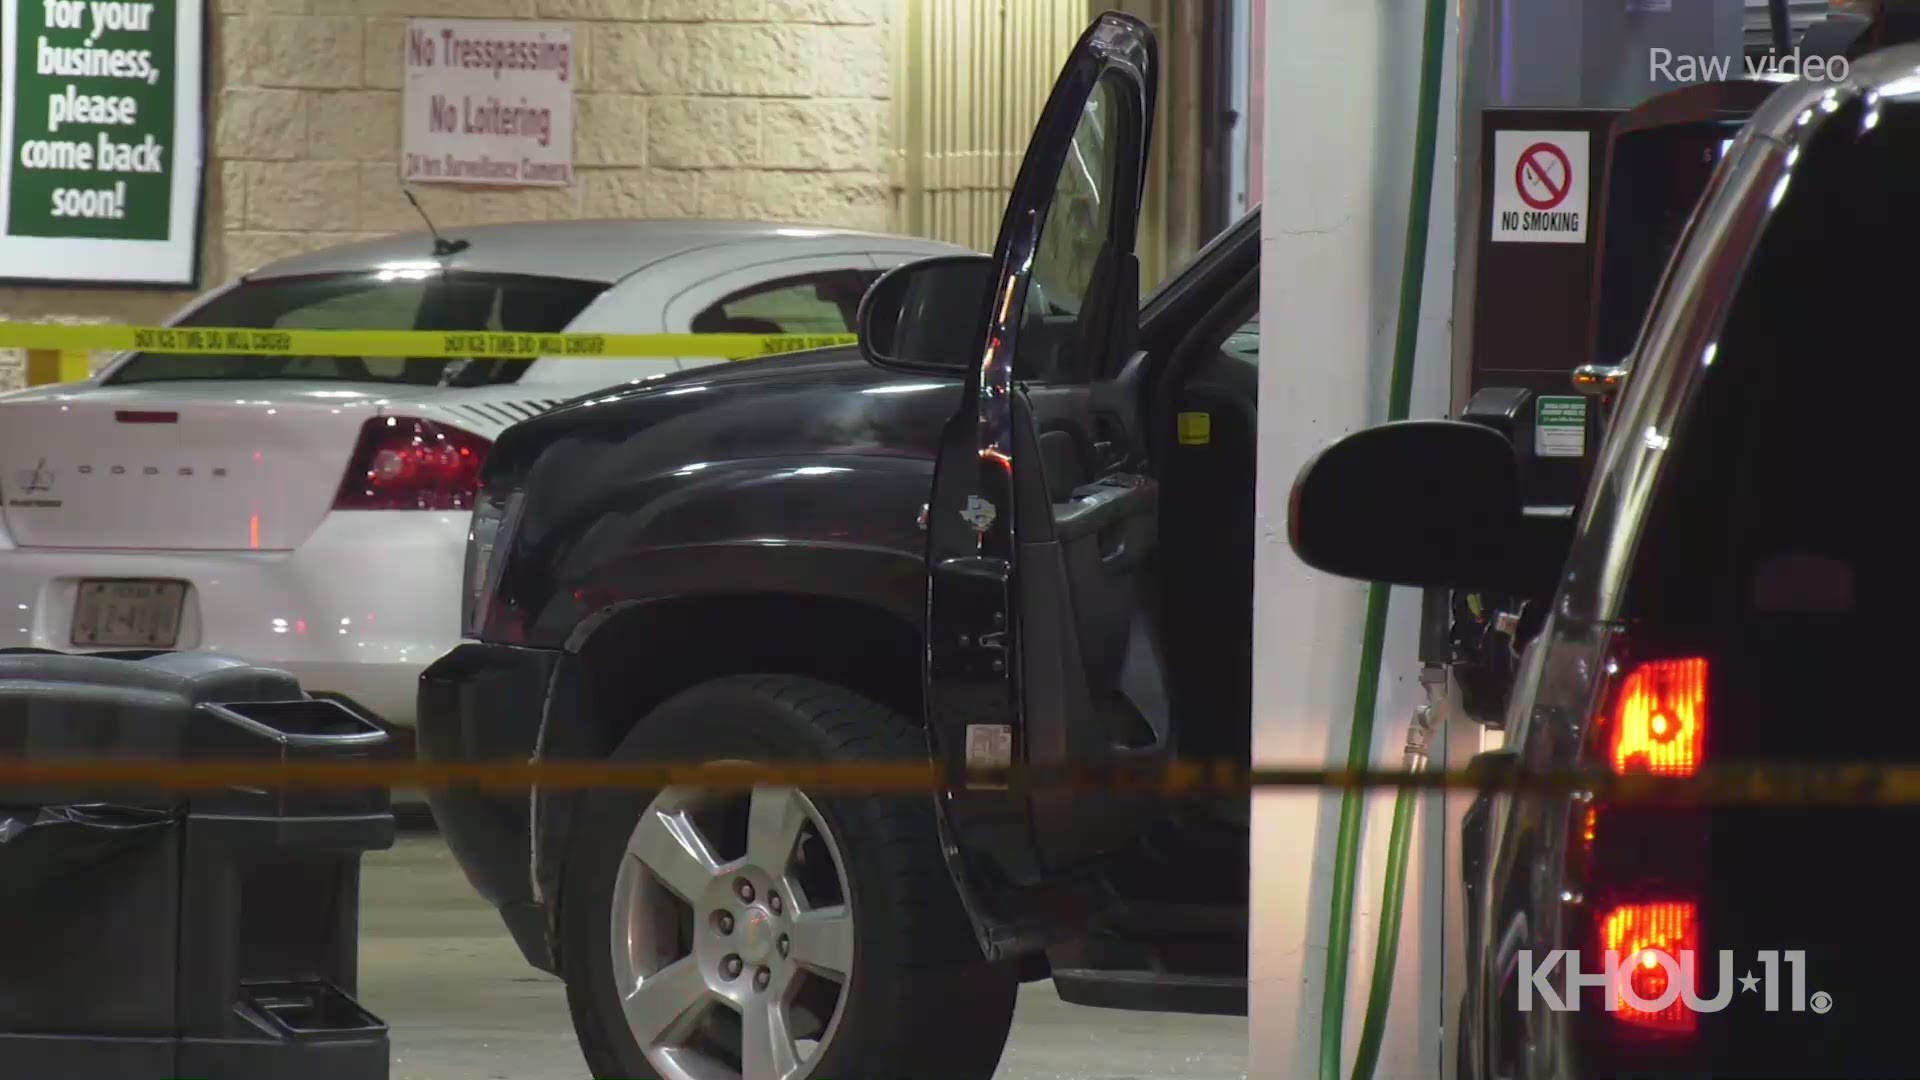 Houston police are investigating what they believe was a targeted killing at a gas station in the Willowbend area late Tuesday.